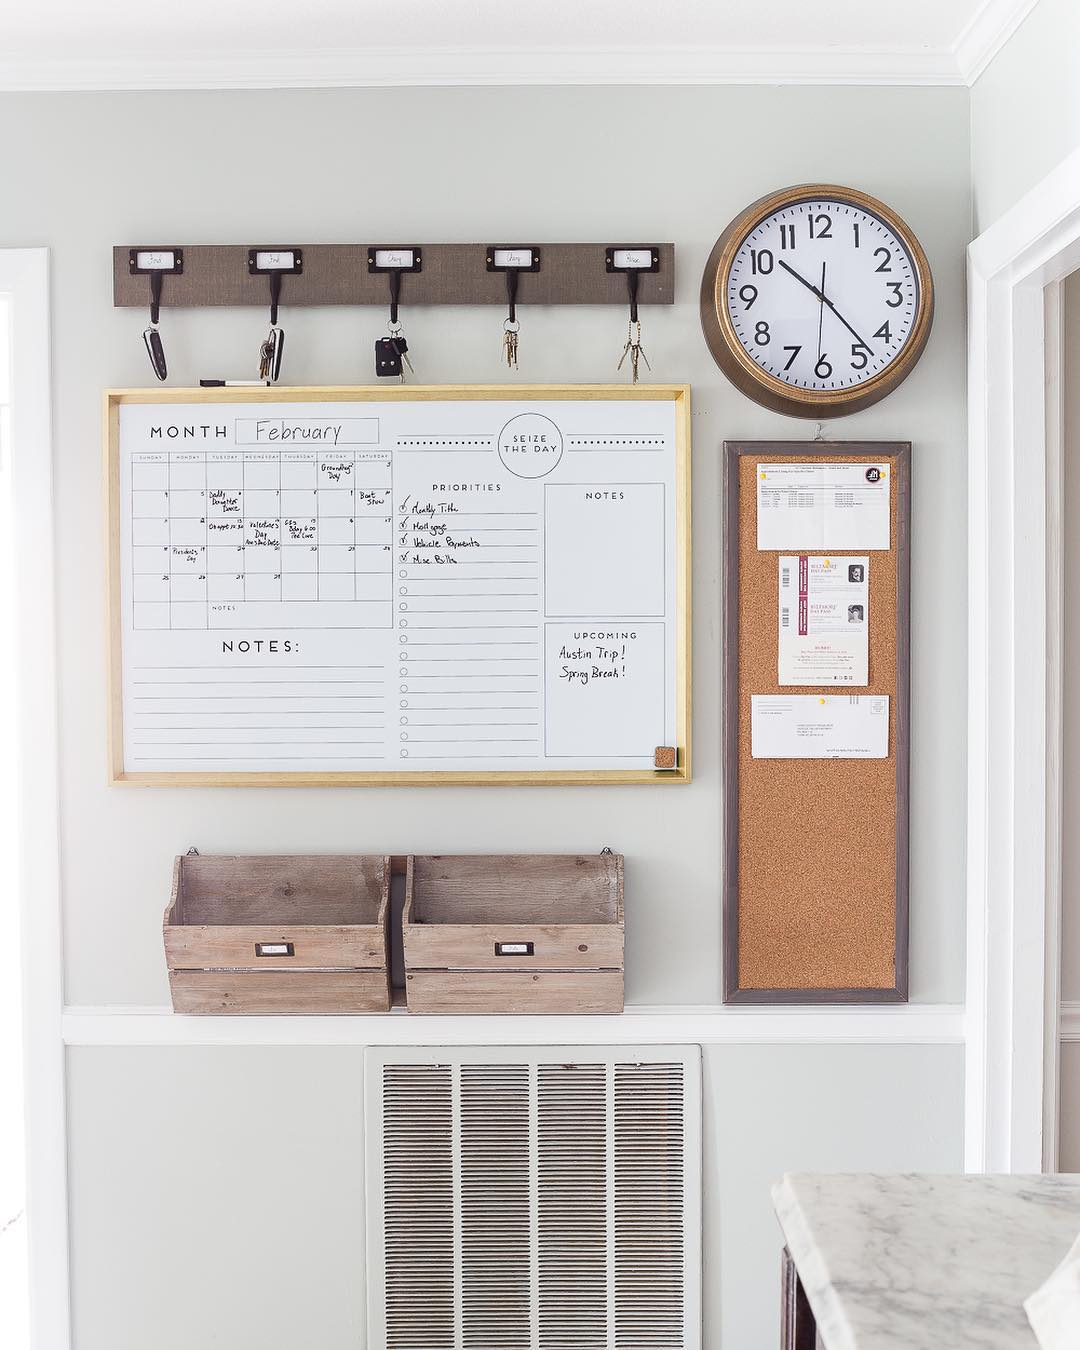 Calendar and clock and hooks on a wall. Photo by Instagram user @organizerjanet